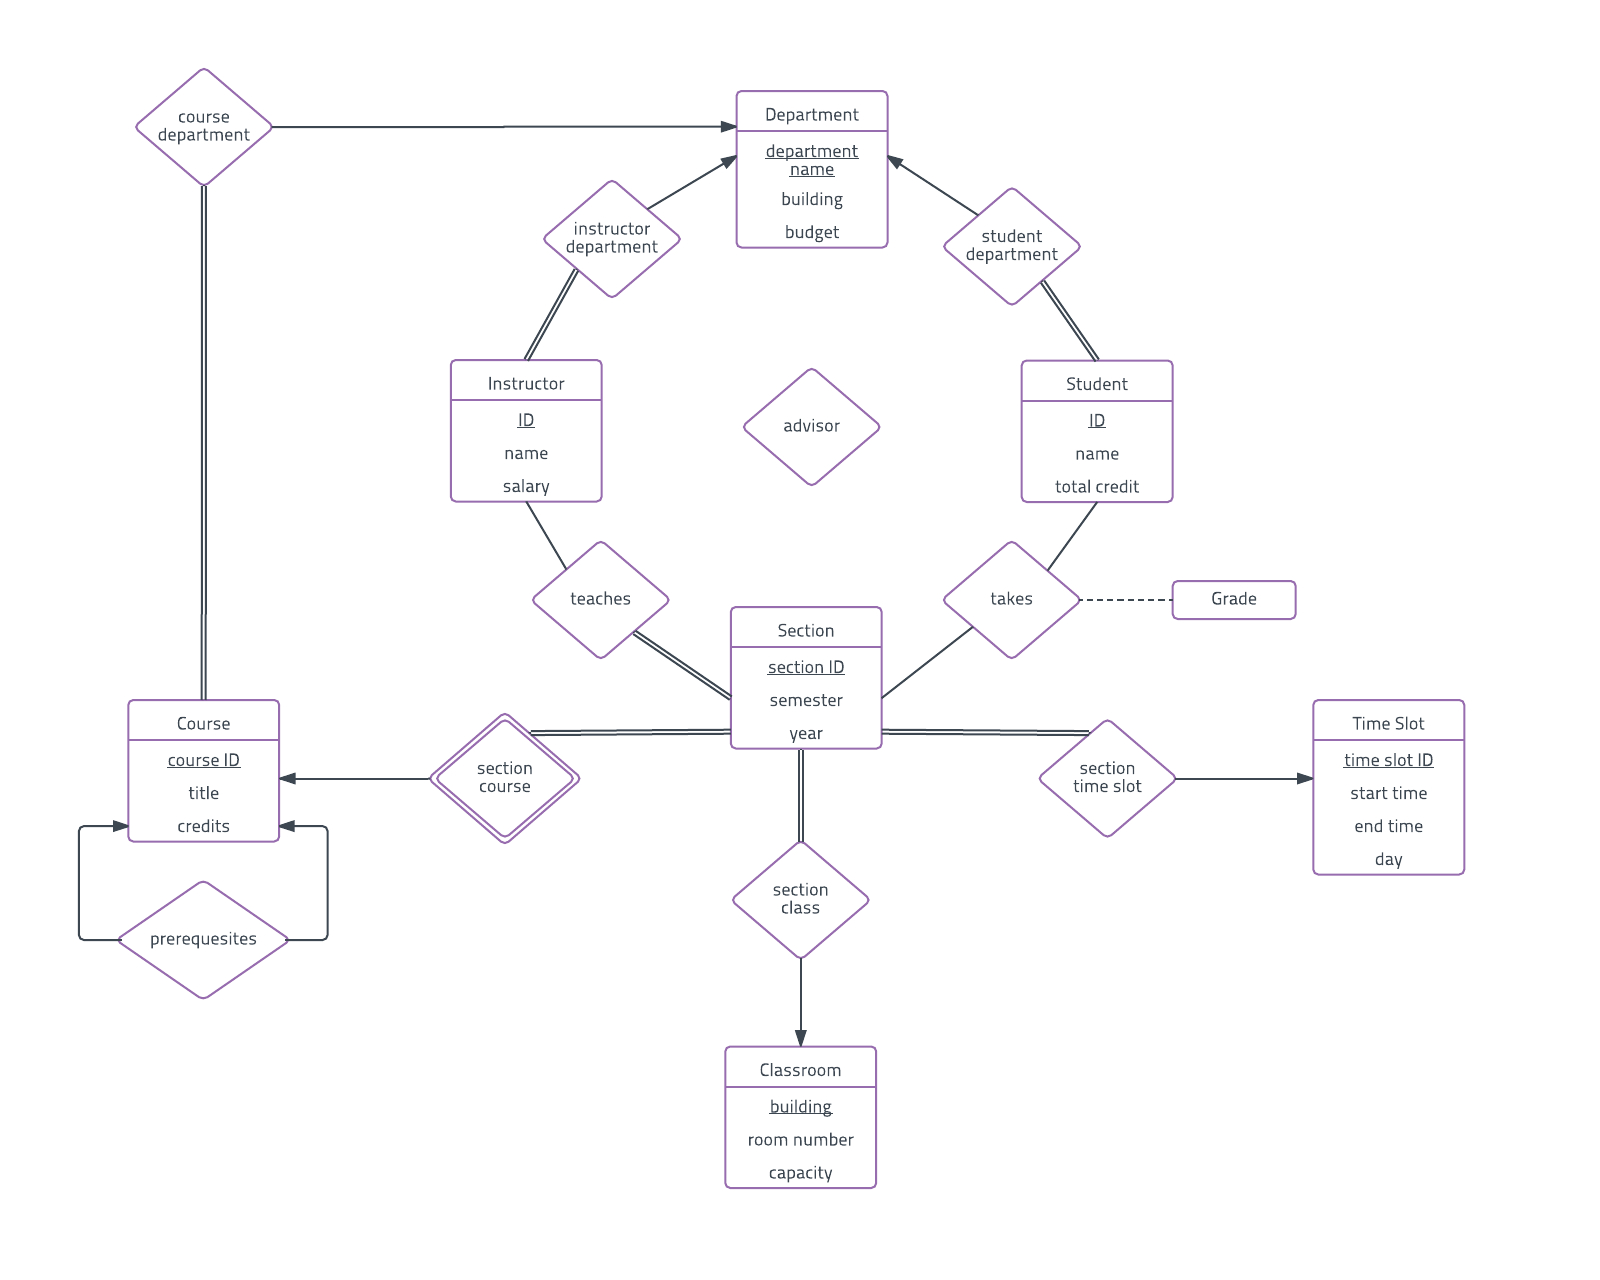 Er Diagram Examples And Templates | Lucidchart within Examples Of Er Diagram In Dbms